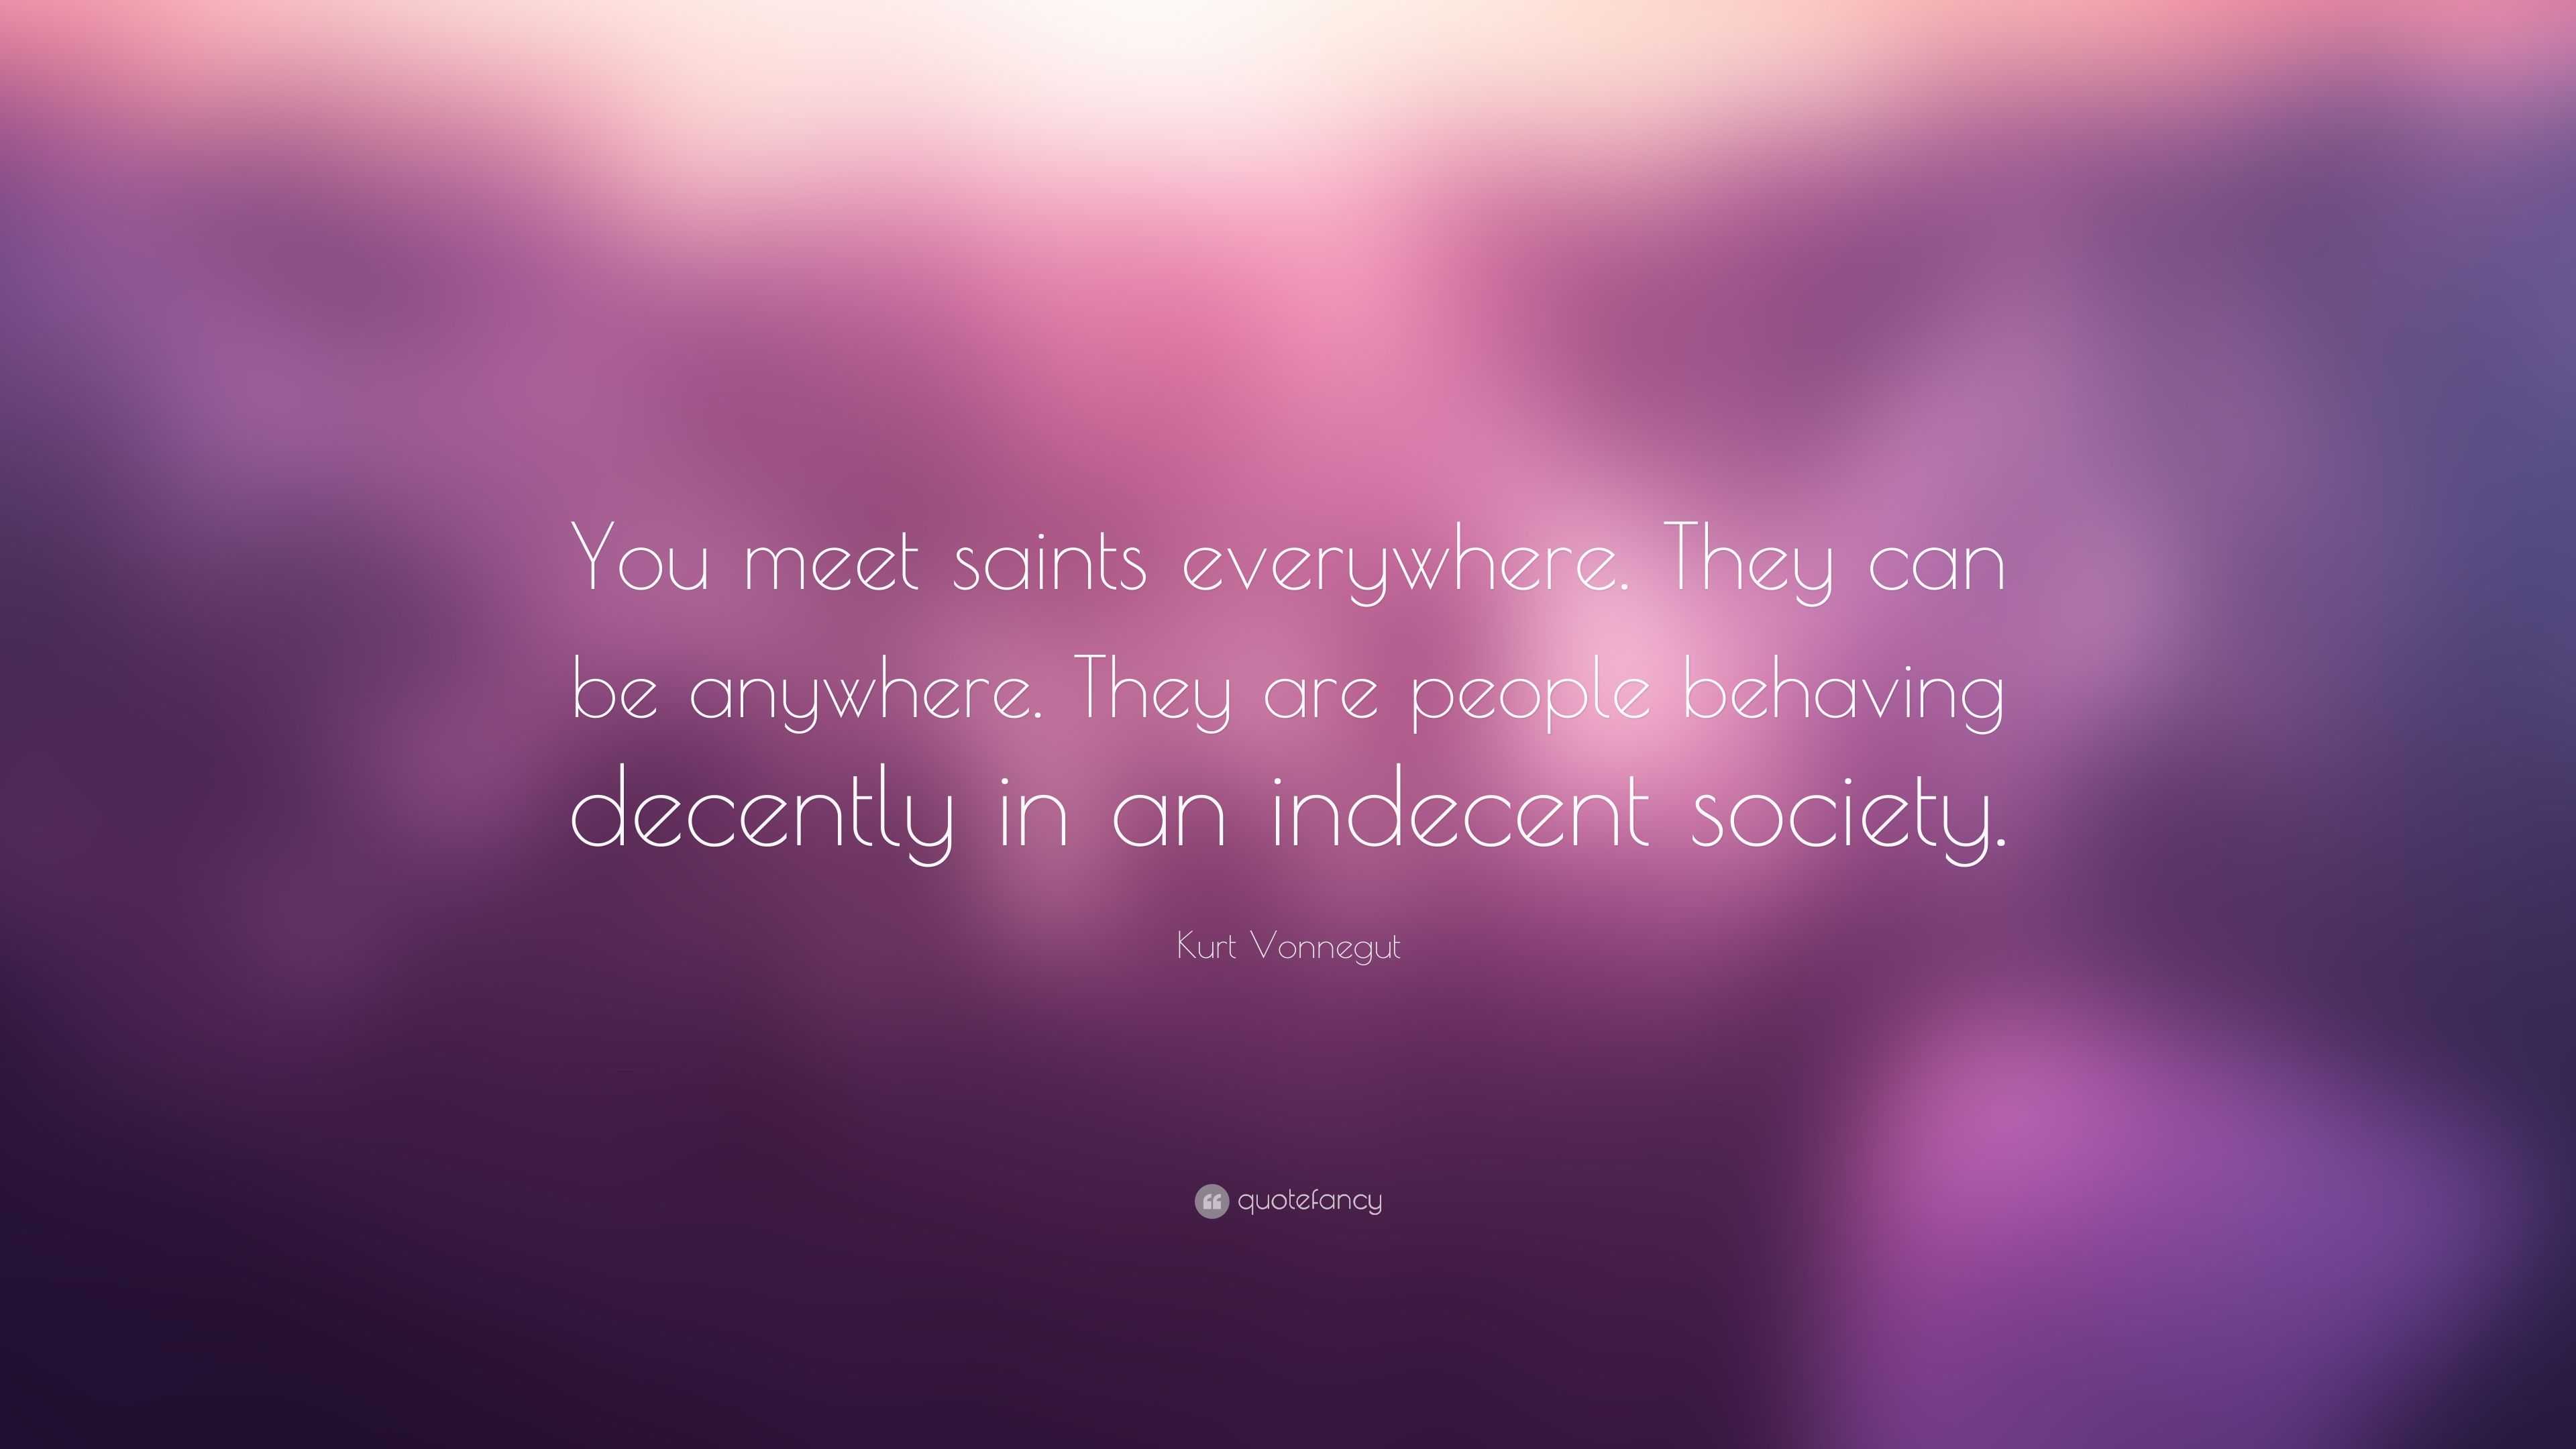 Kurt Vonnegut Quote: “You meet saints everywhere. They can be anywhere ...